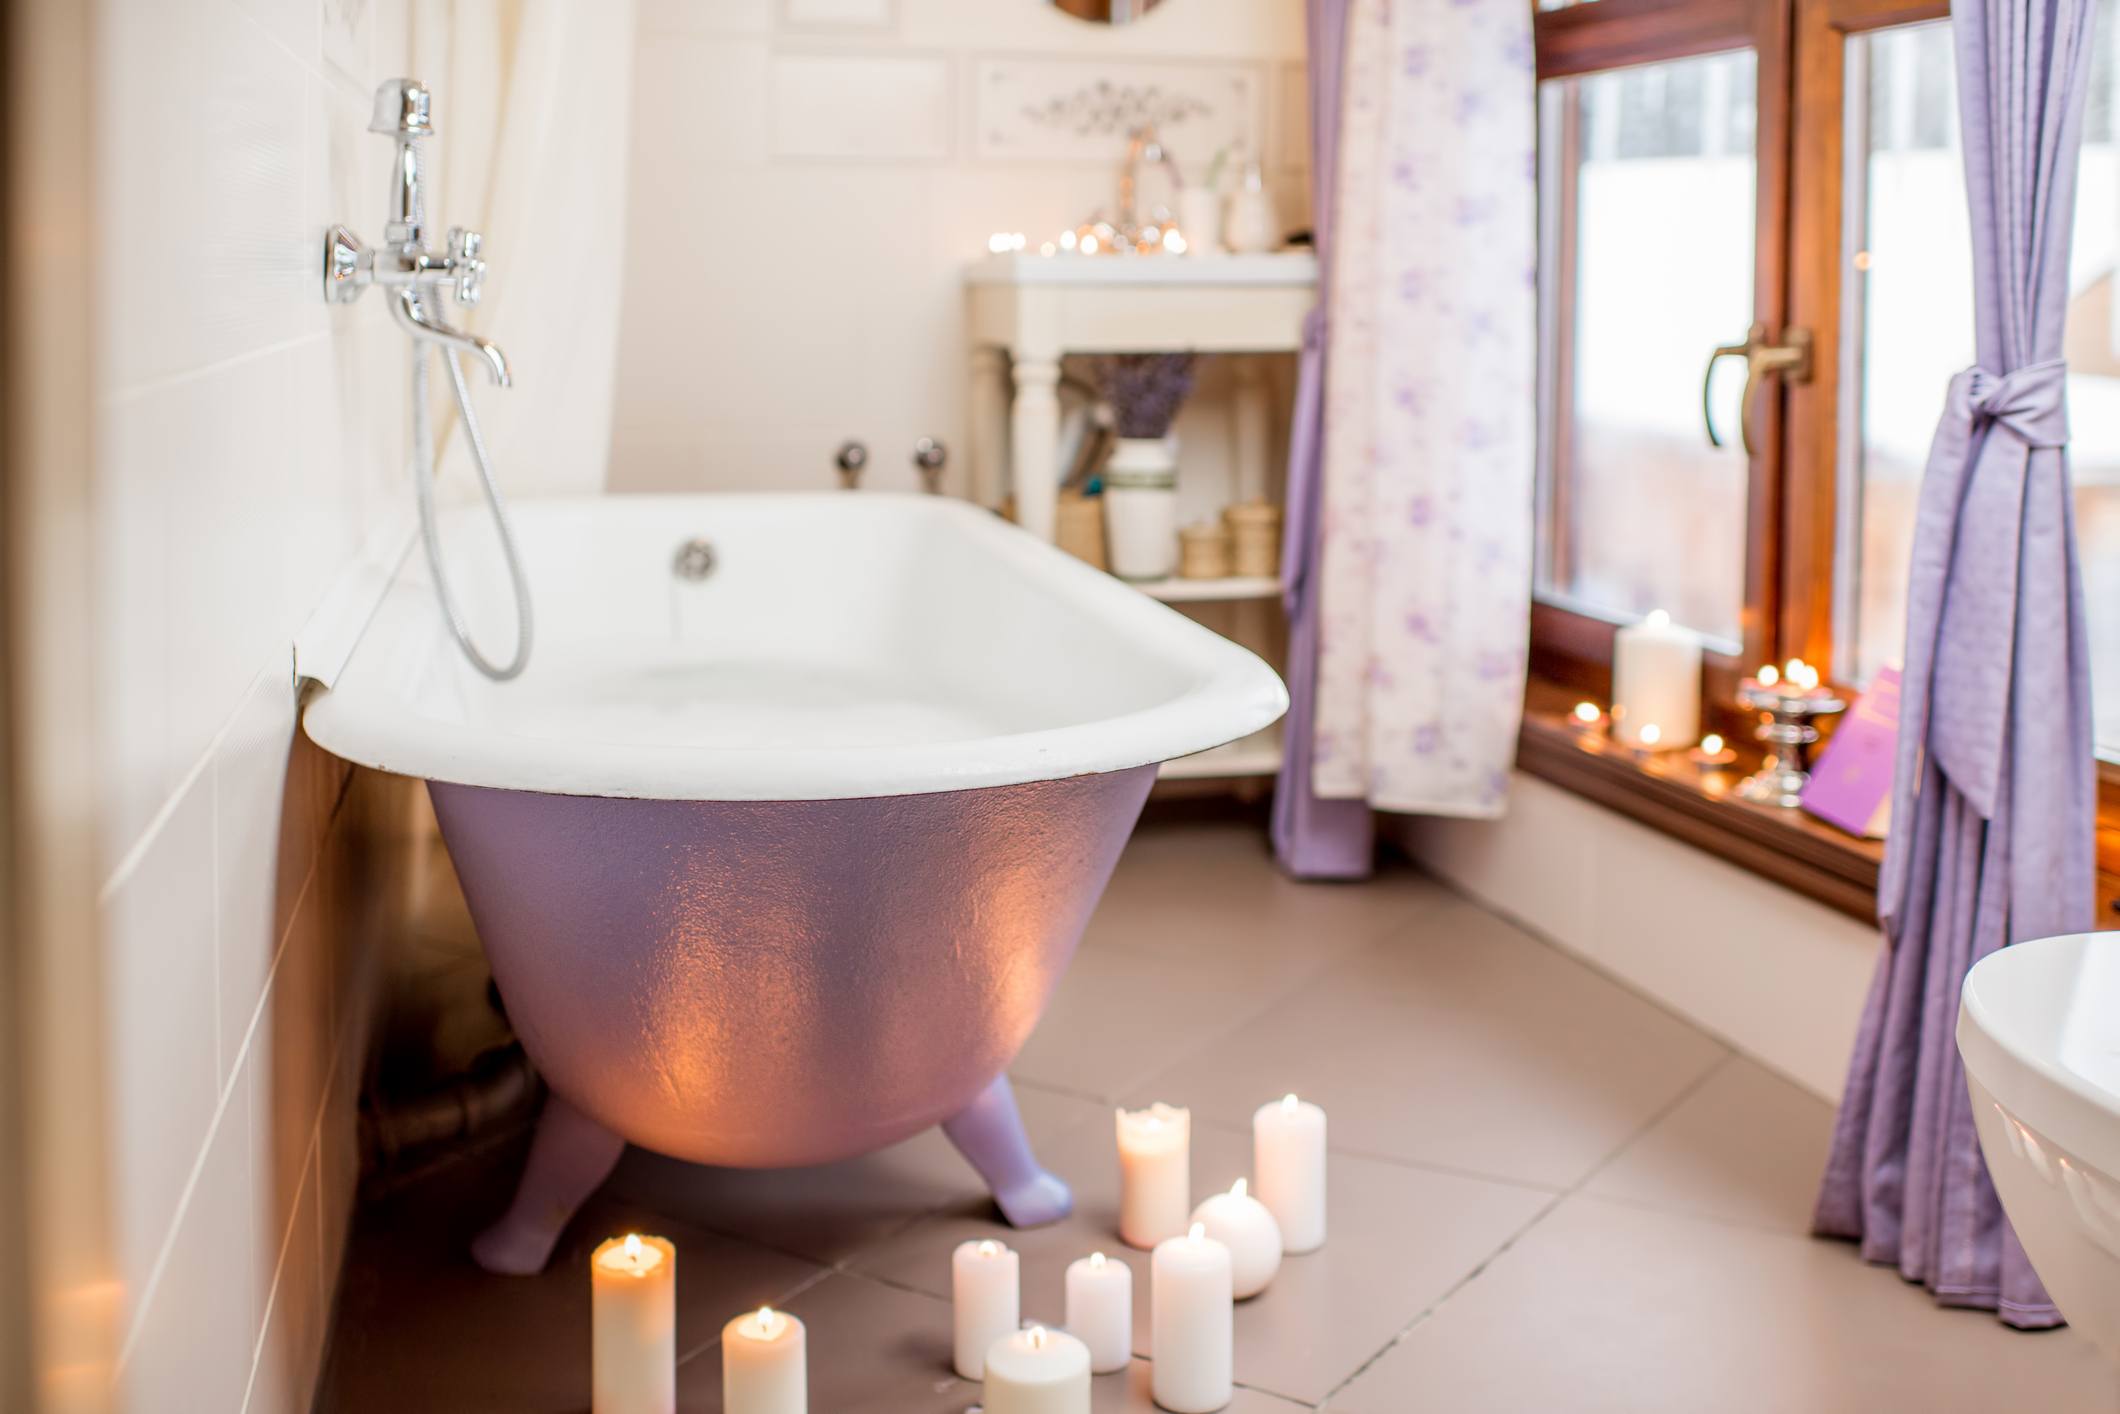 Bathroom interior with retro violet bath decorated with candles